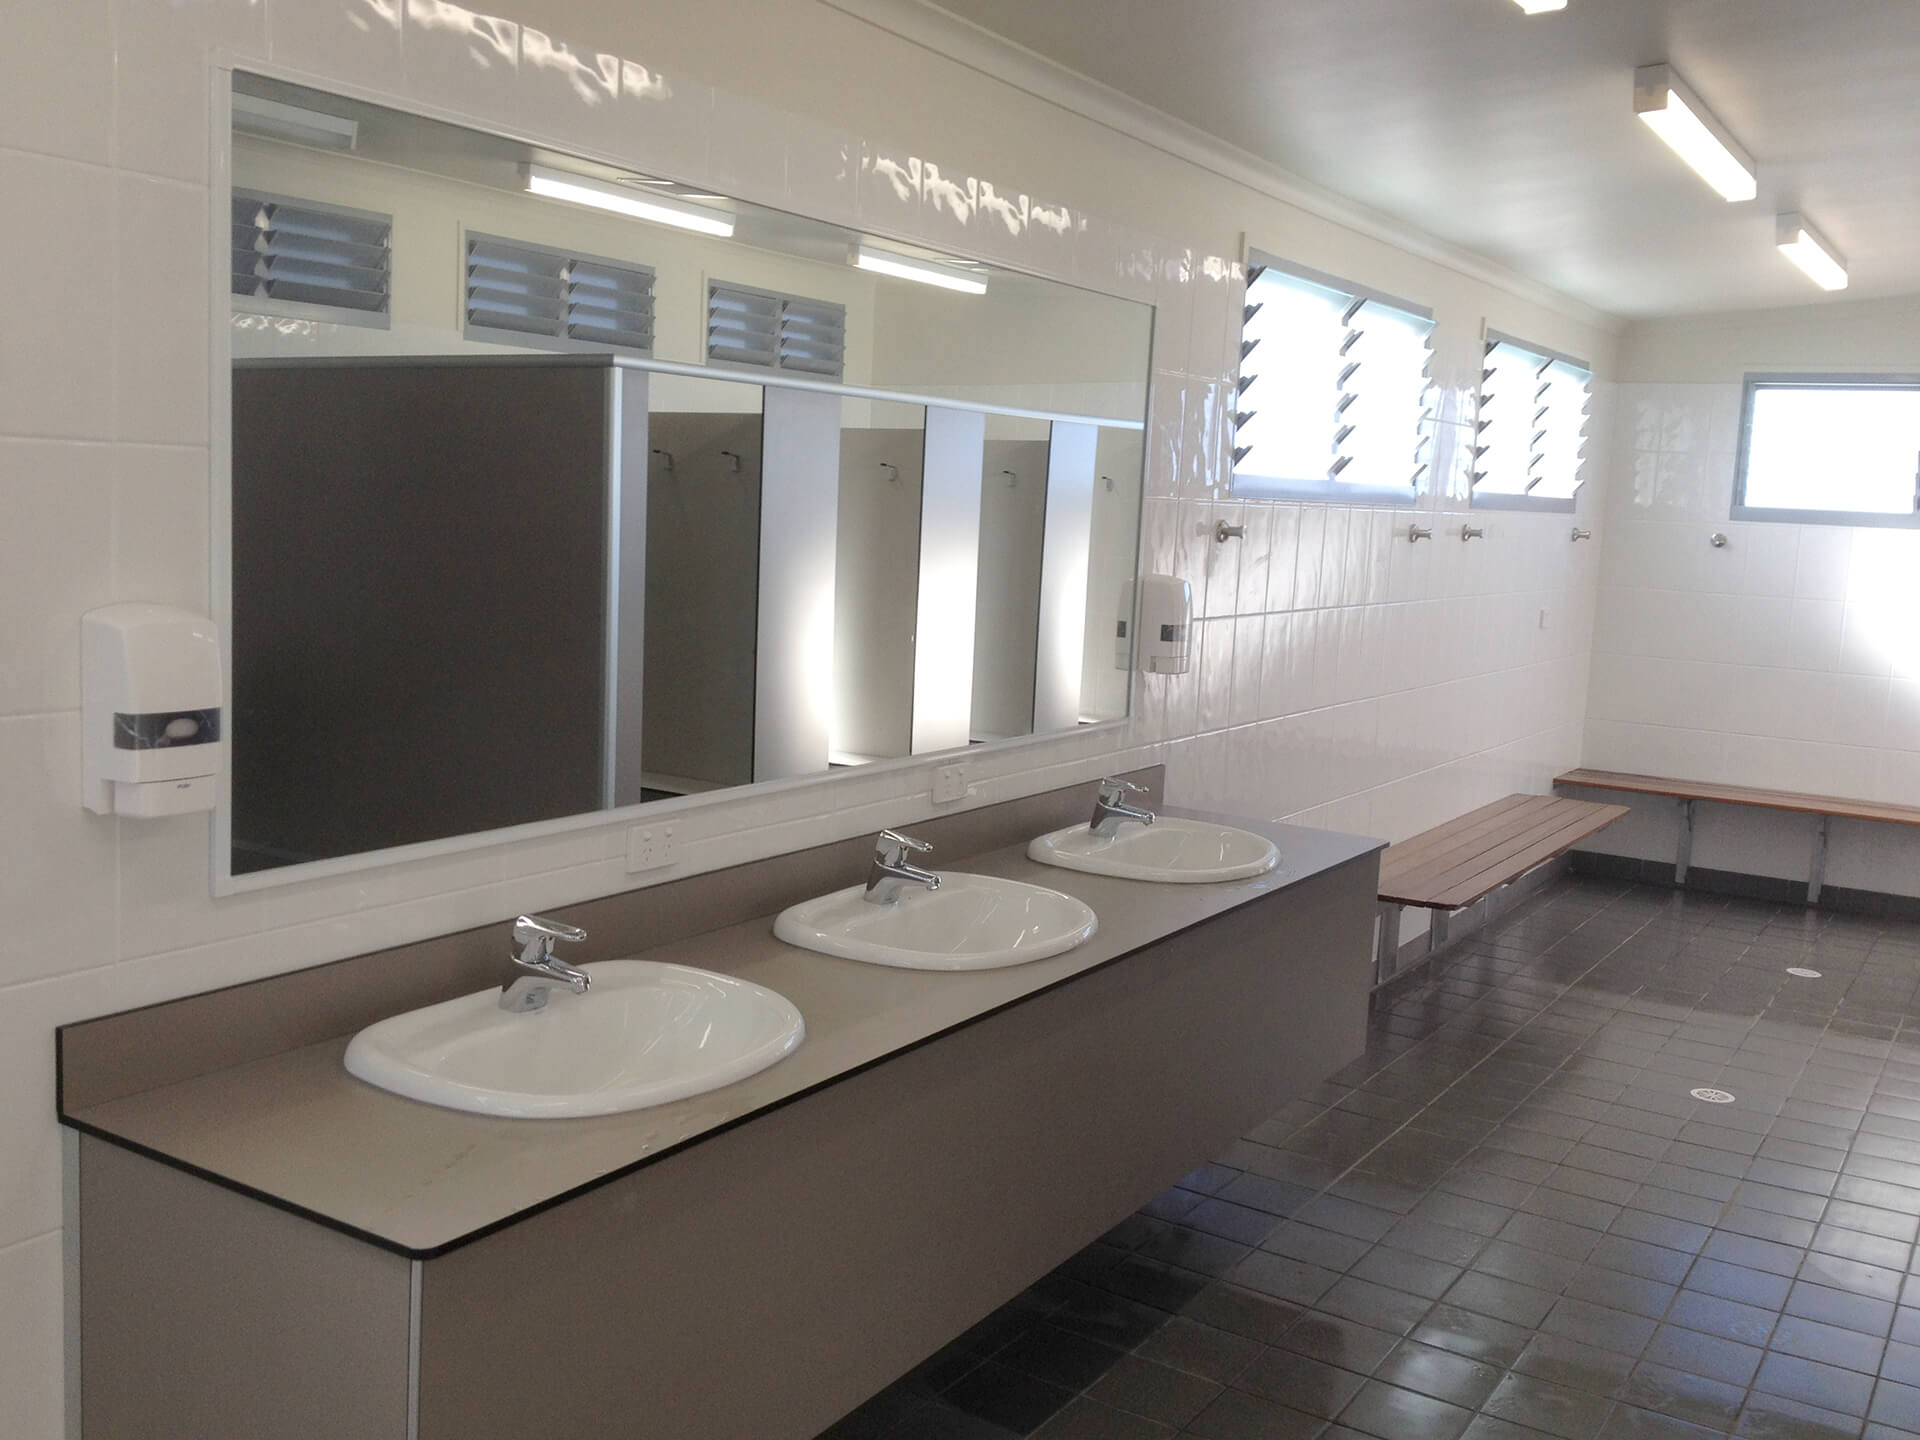 A photo of an Amenity building with washroom, bathroom and toilets